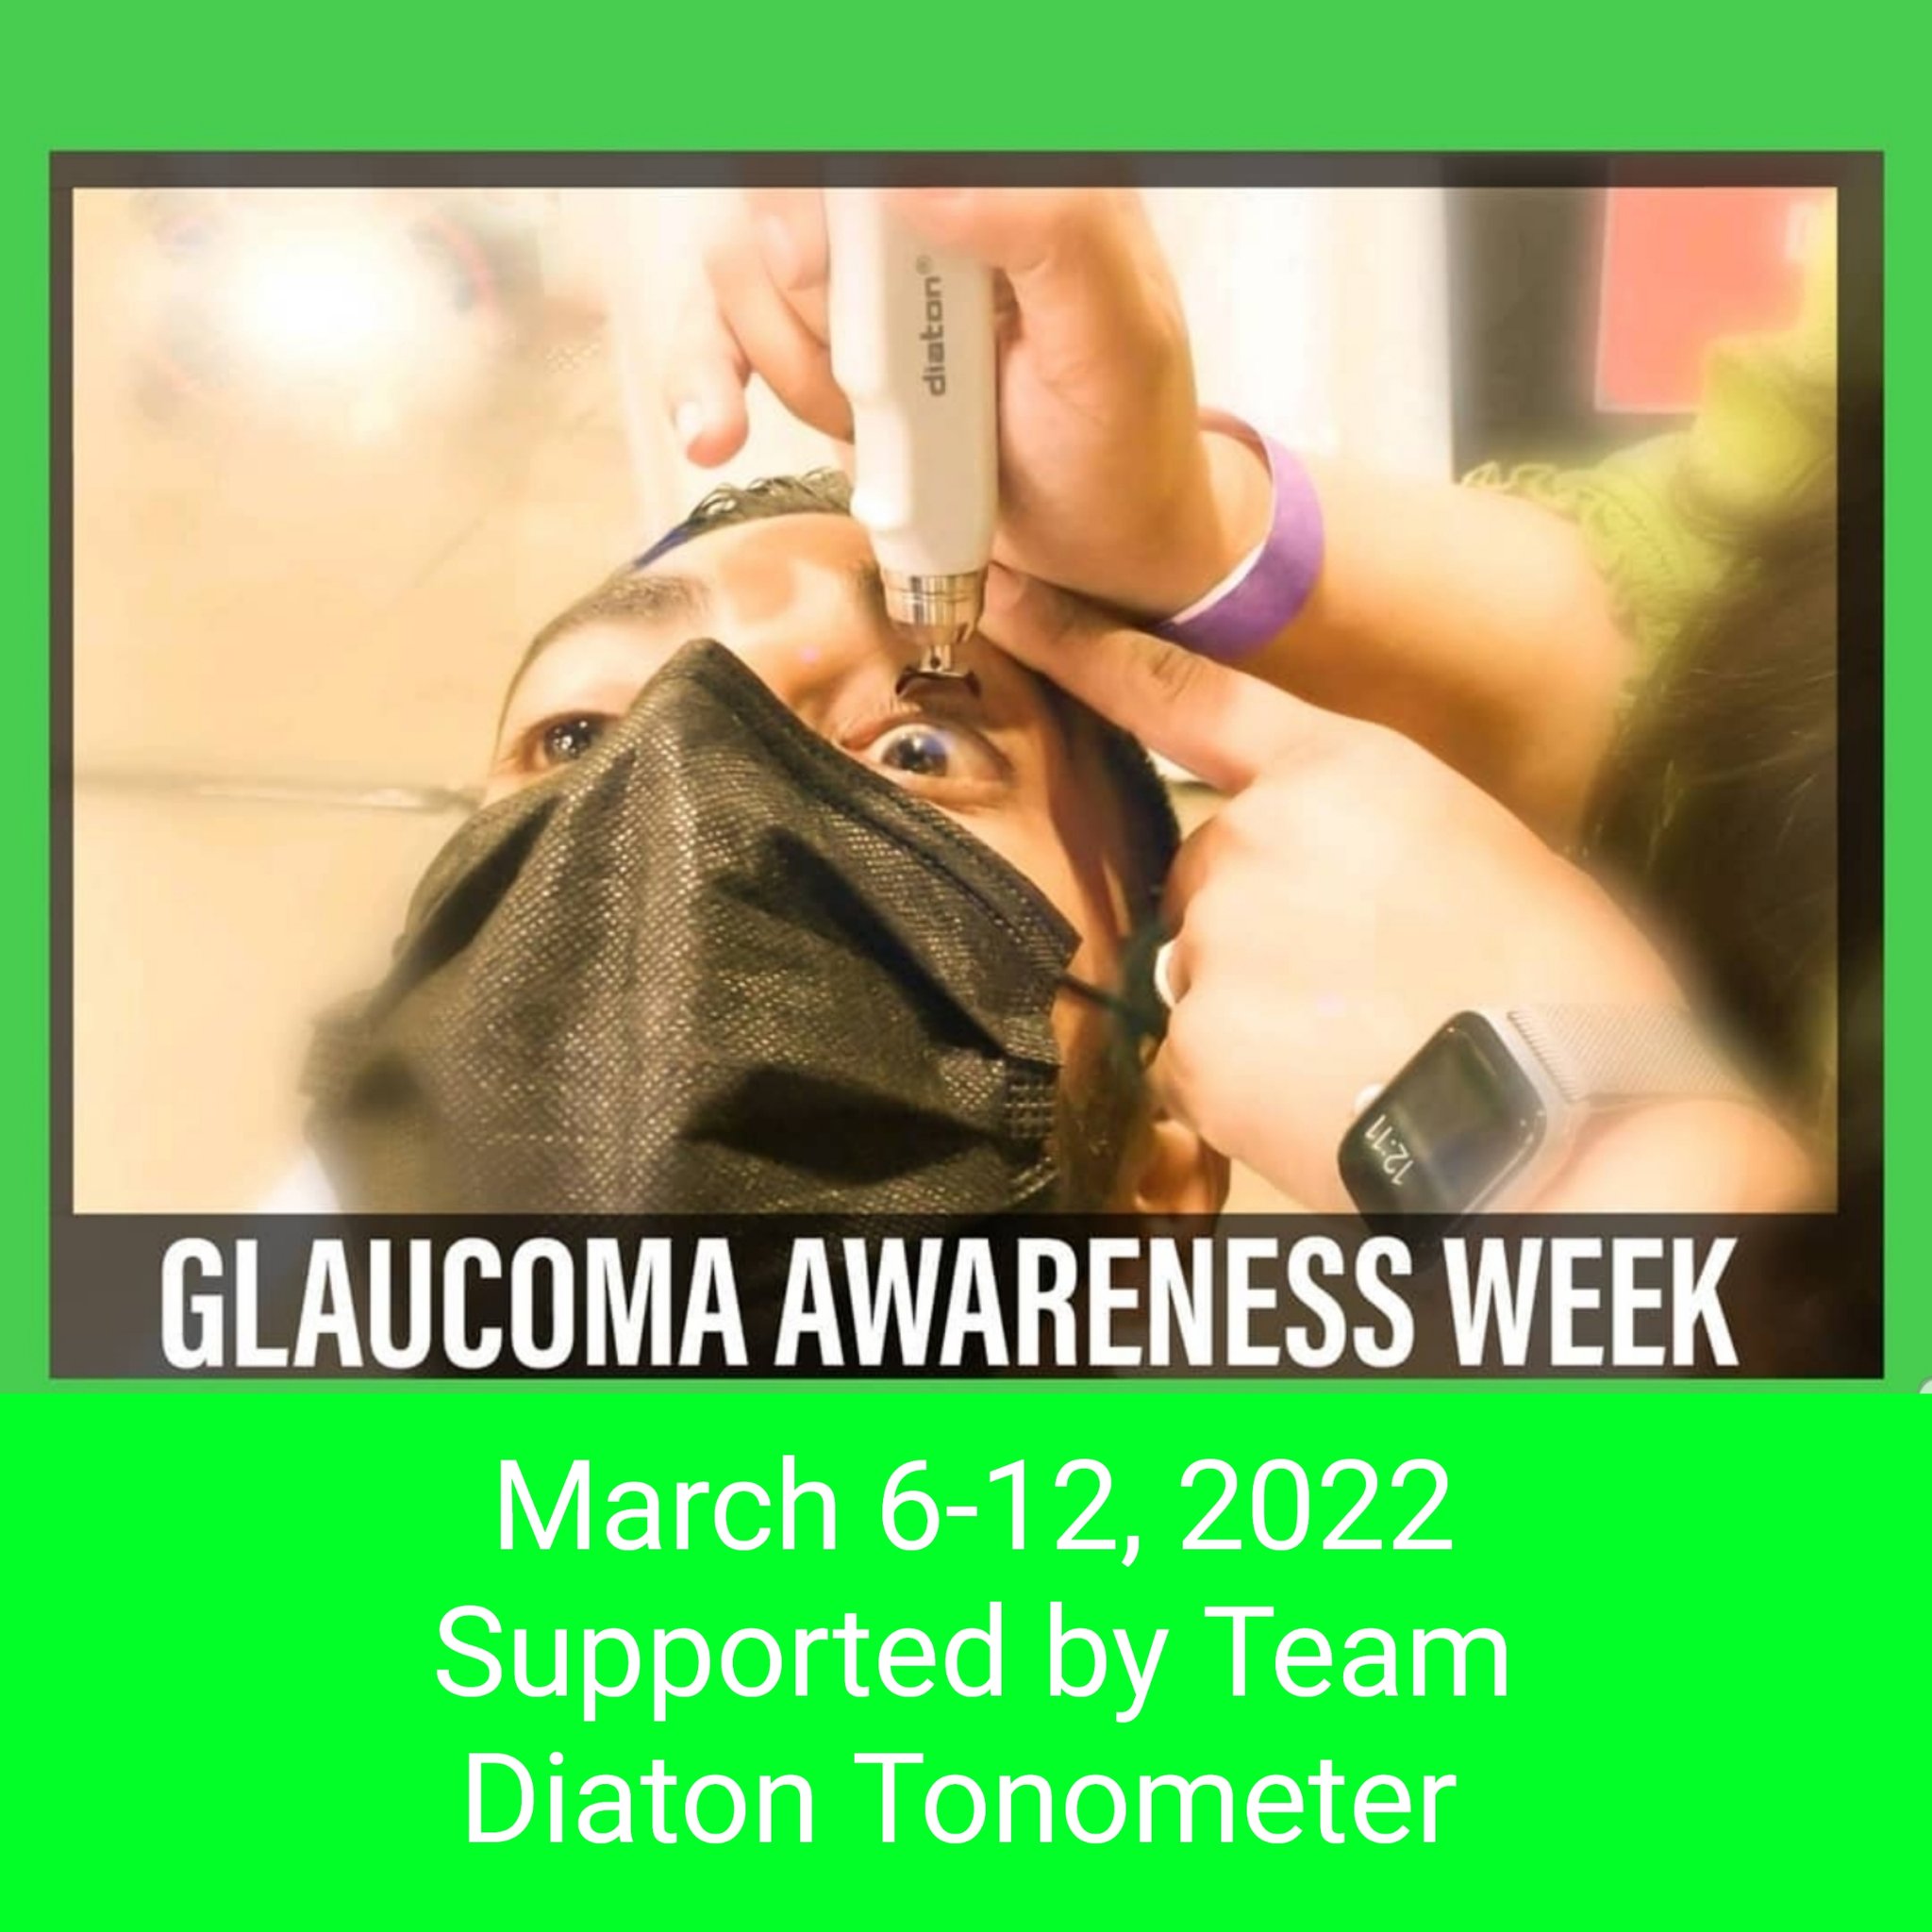 How Diaton Tonometer Assists During World Glaucoma Week with Screening and Glaucoma Awareness